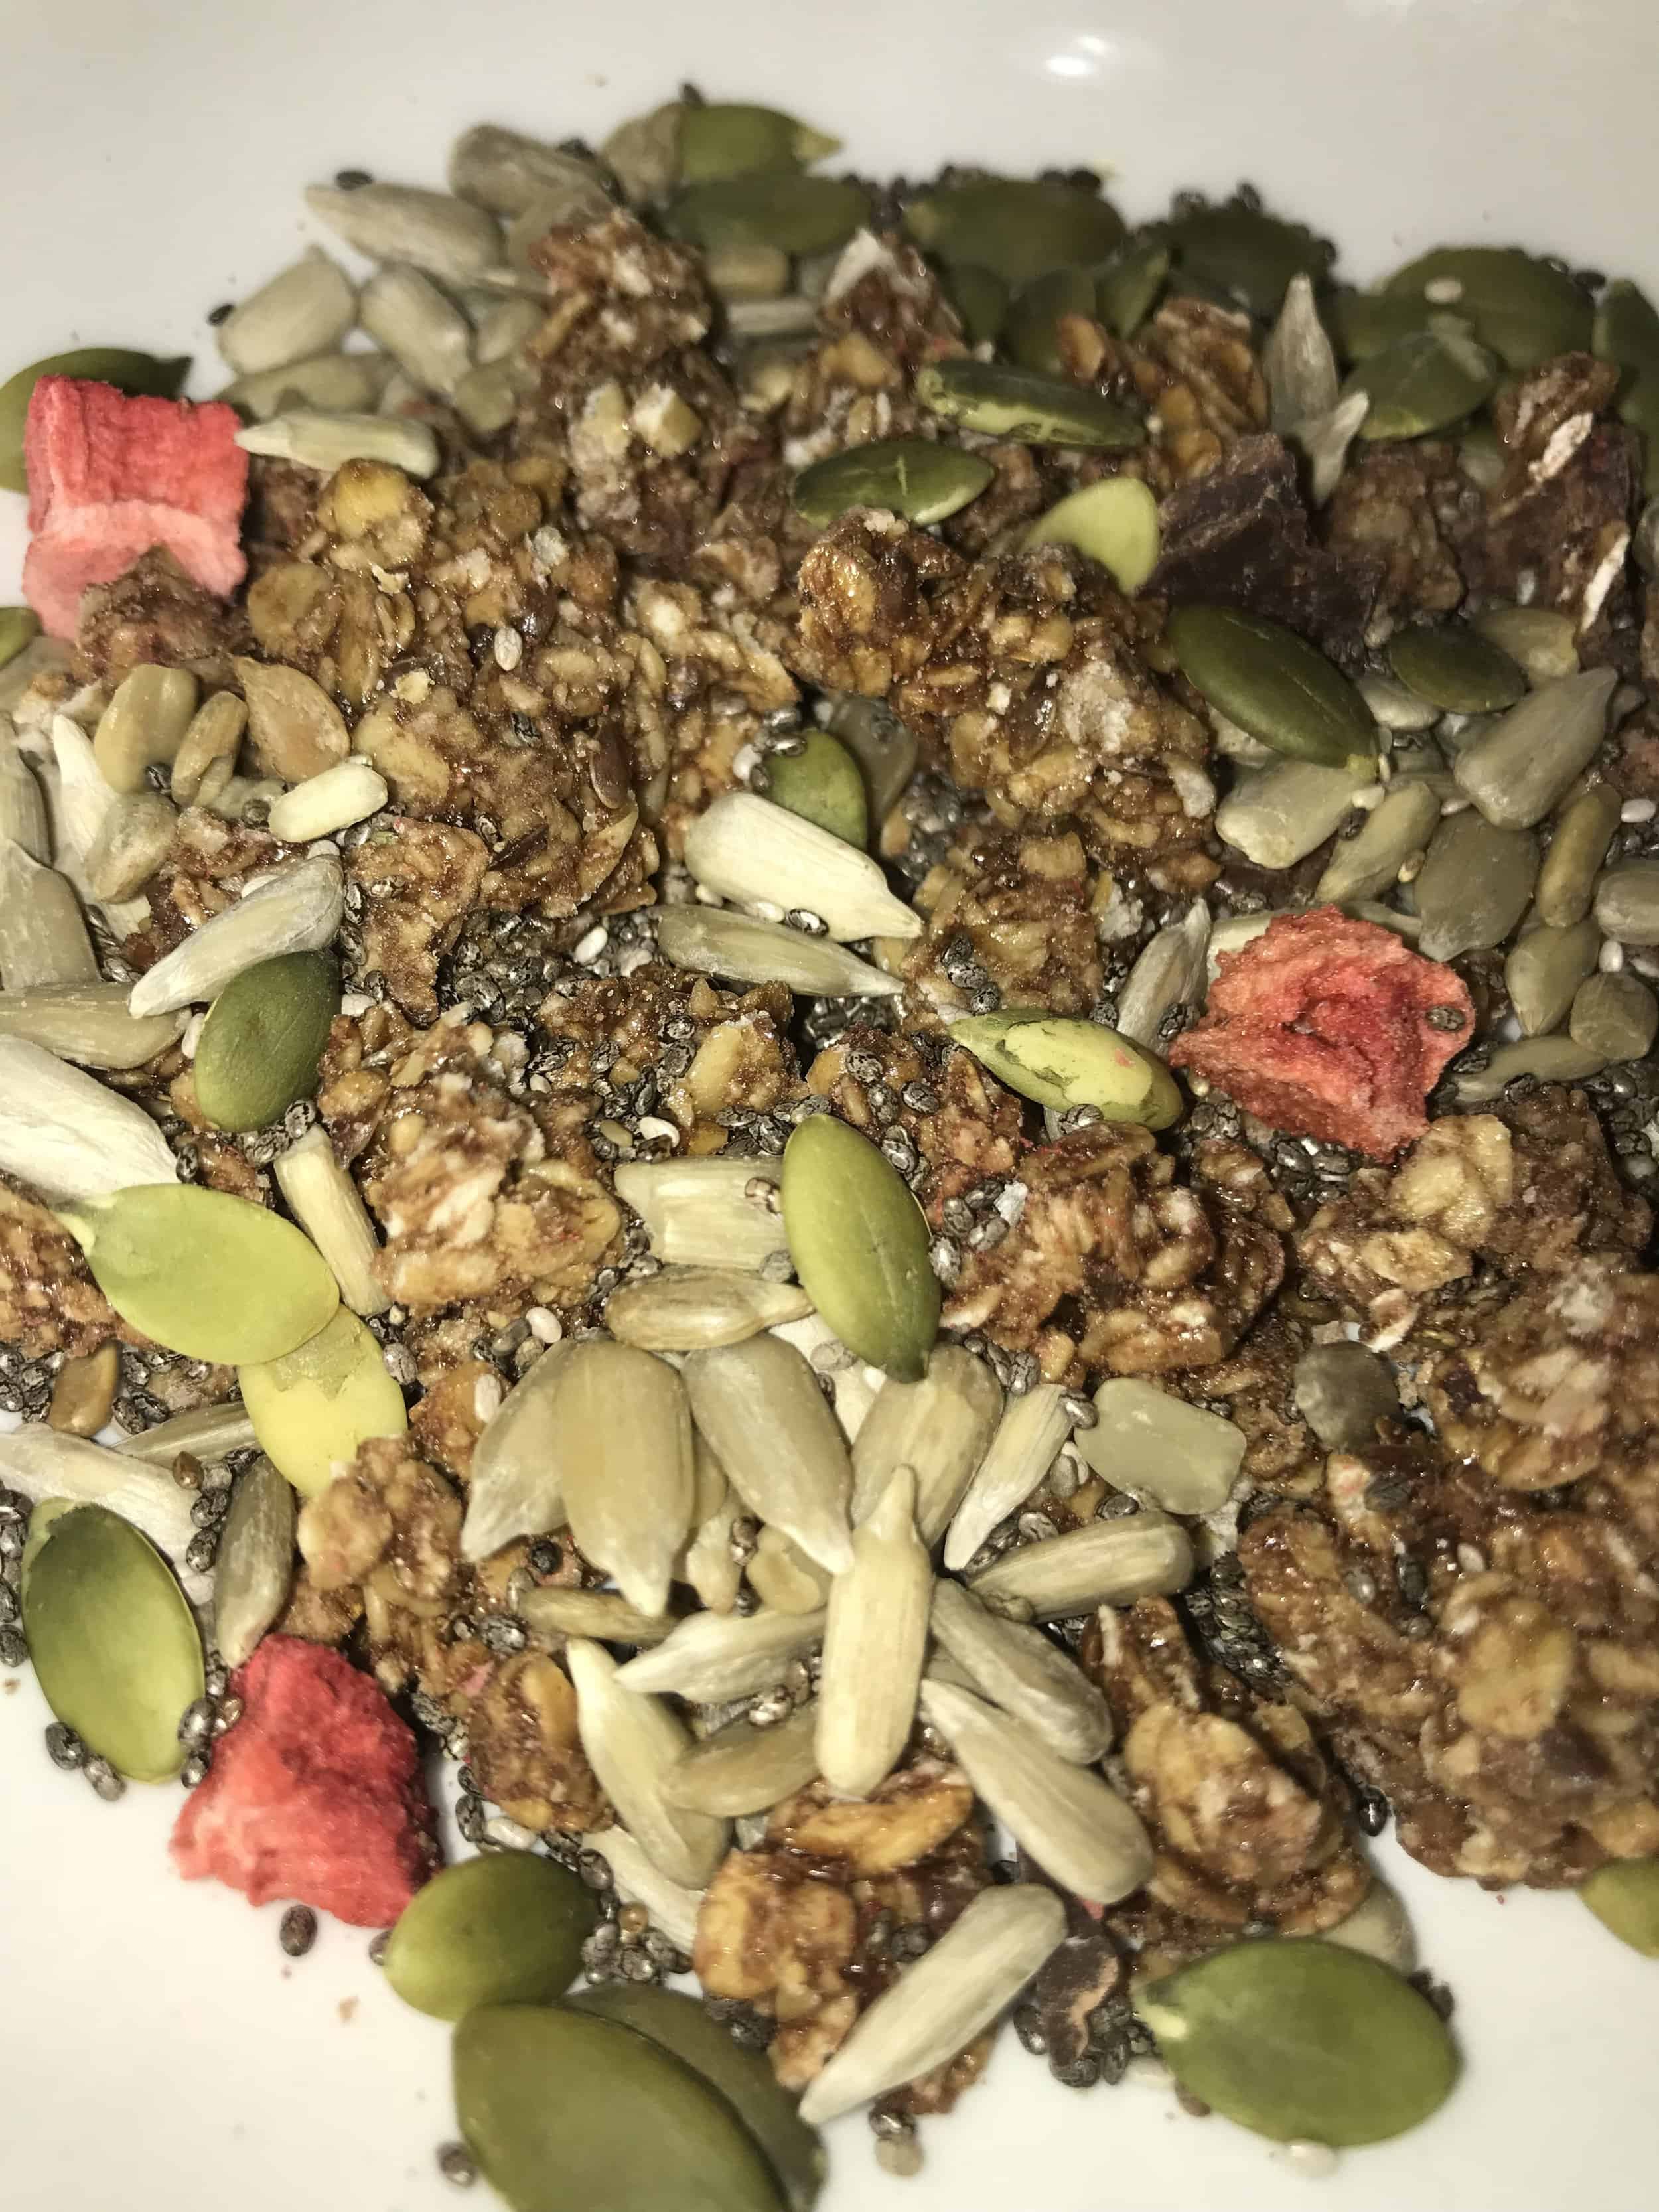 image of cereal mixed with many seeds: sunflower, pumpkin, chia